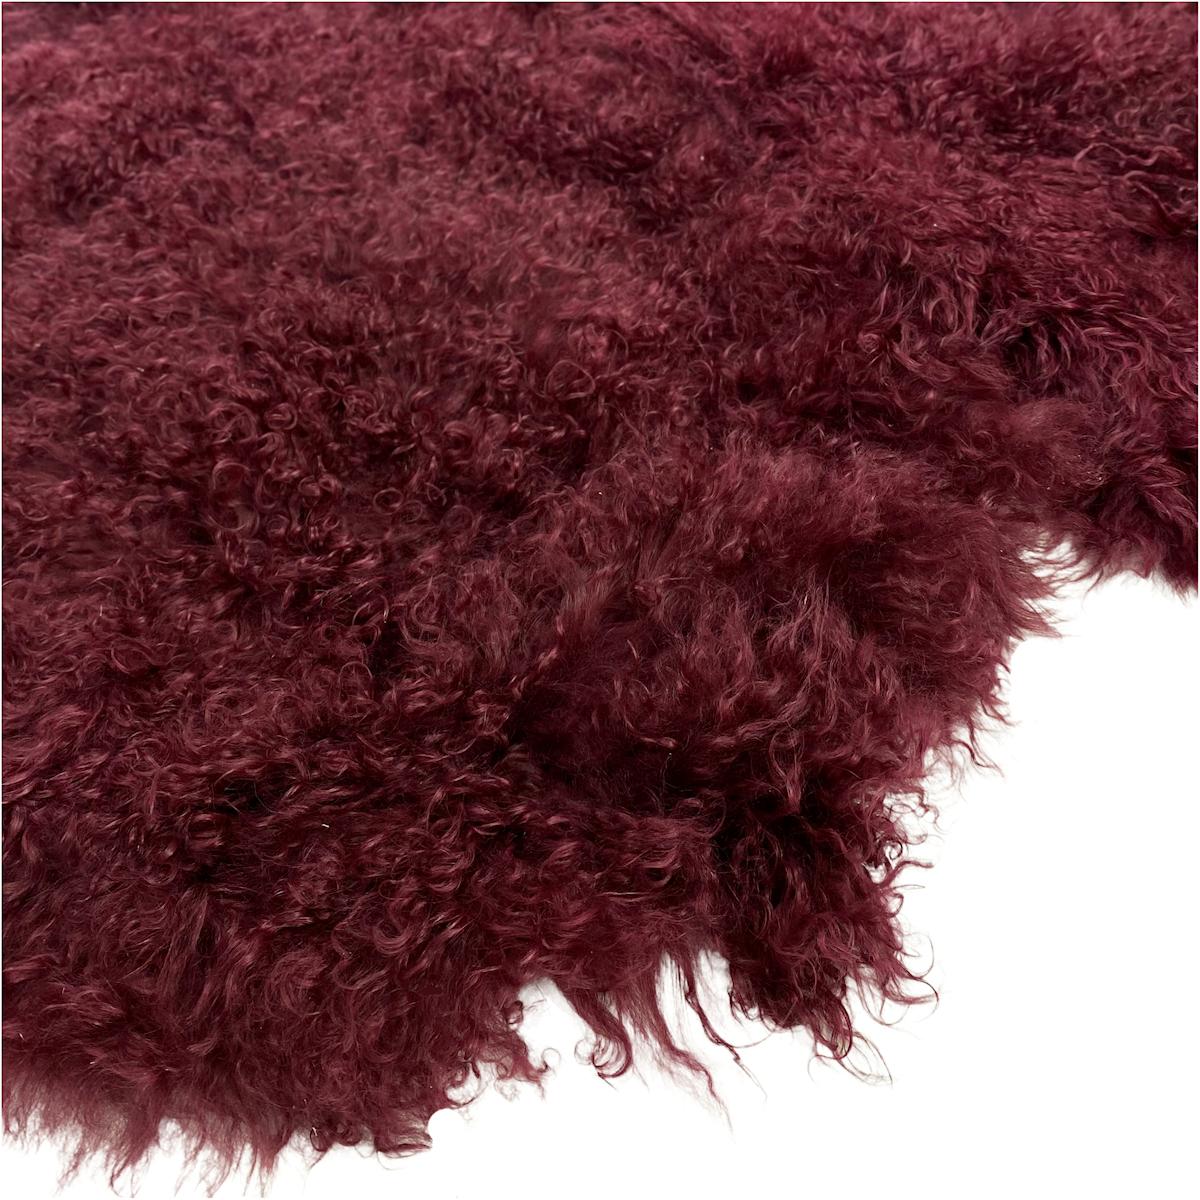 Enchanting and irresistible softness this burgundy red fur rug translates modern and stylish design paralleled with an expression of natural signature living. 

Featuring an eclectic wine color, enhancing the natural beauty of the Mongolian